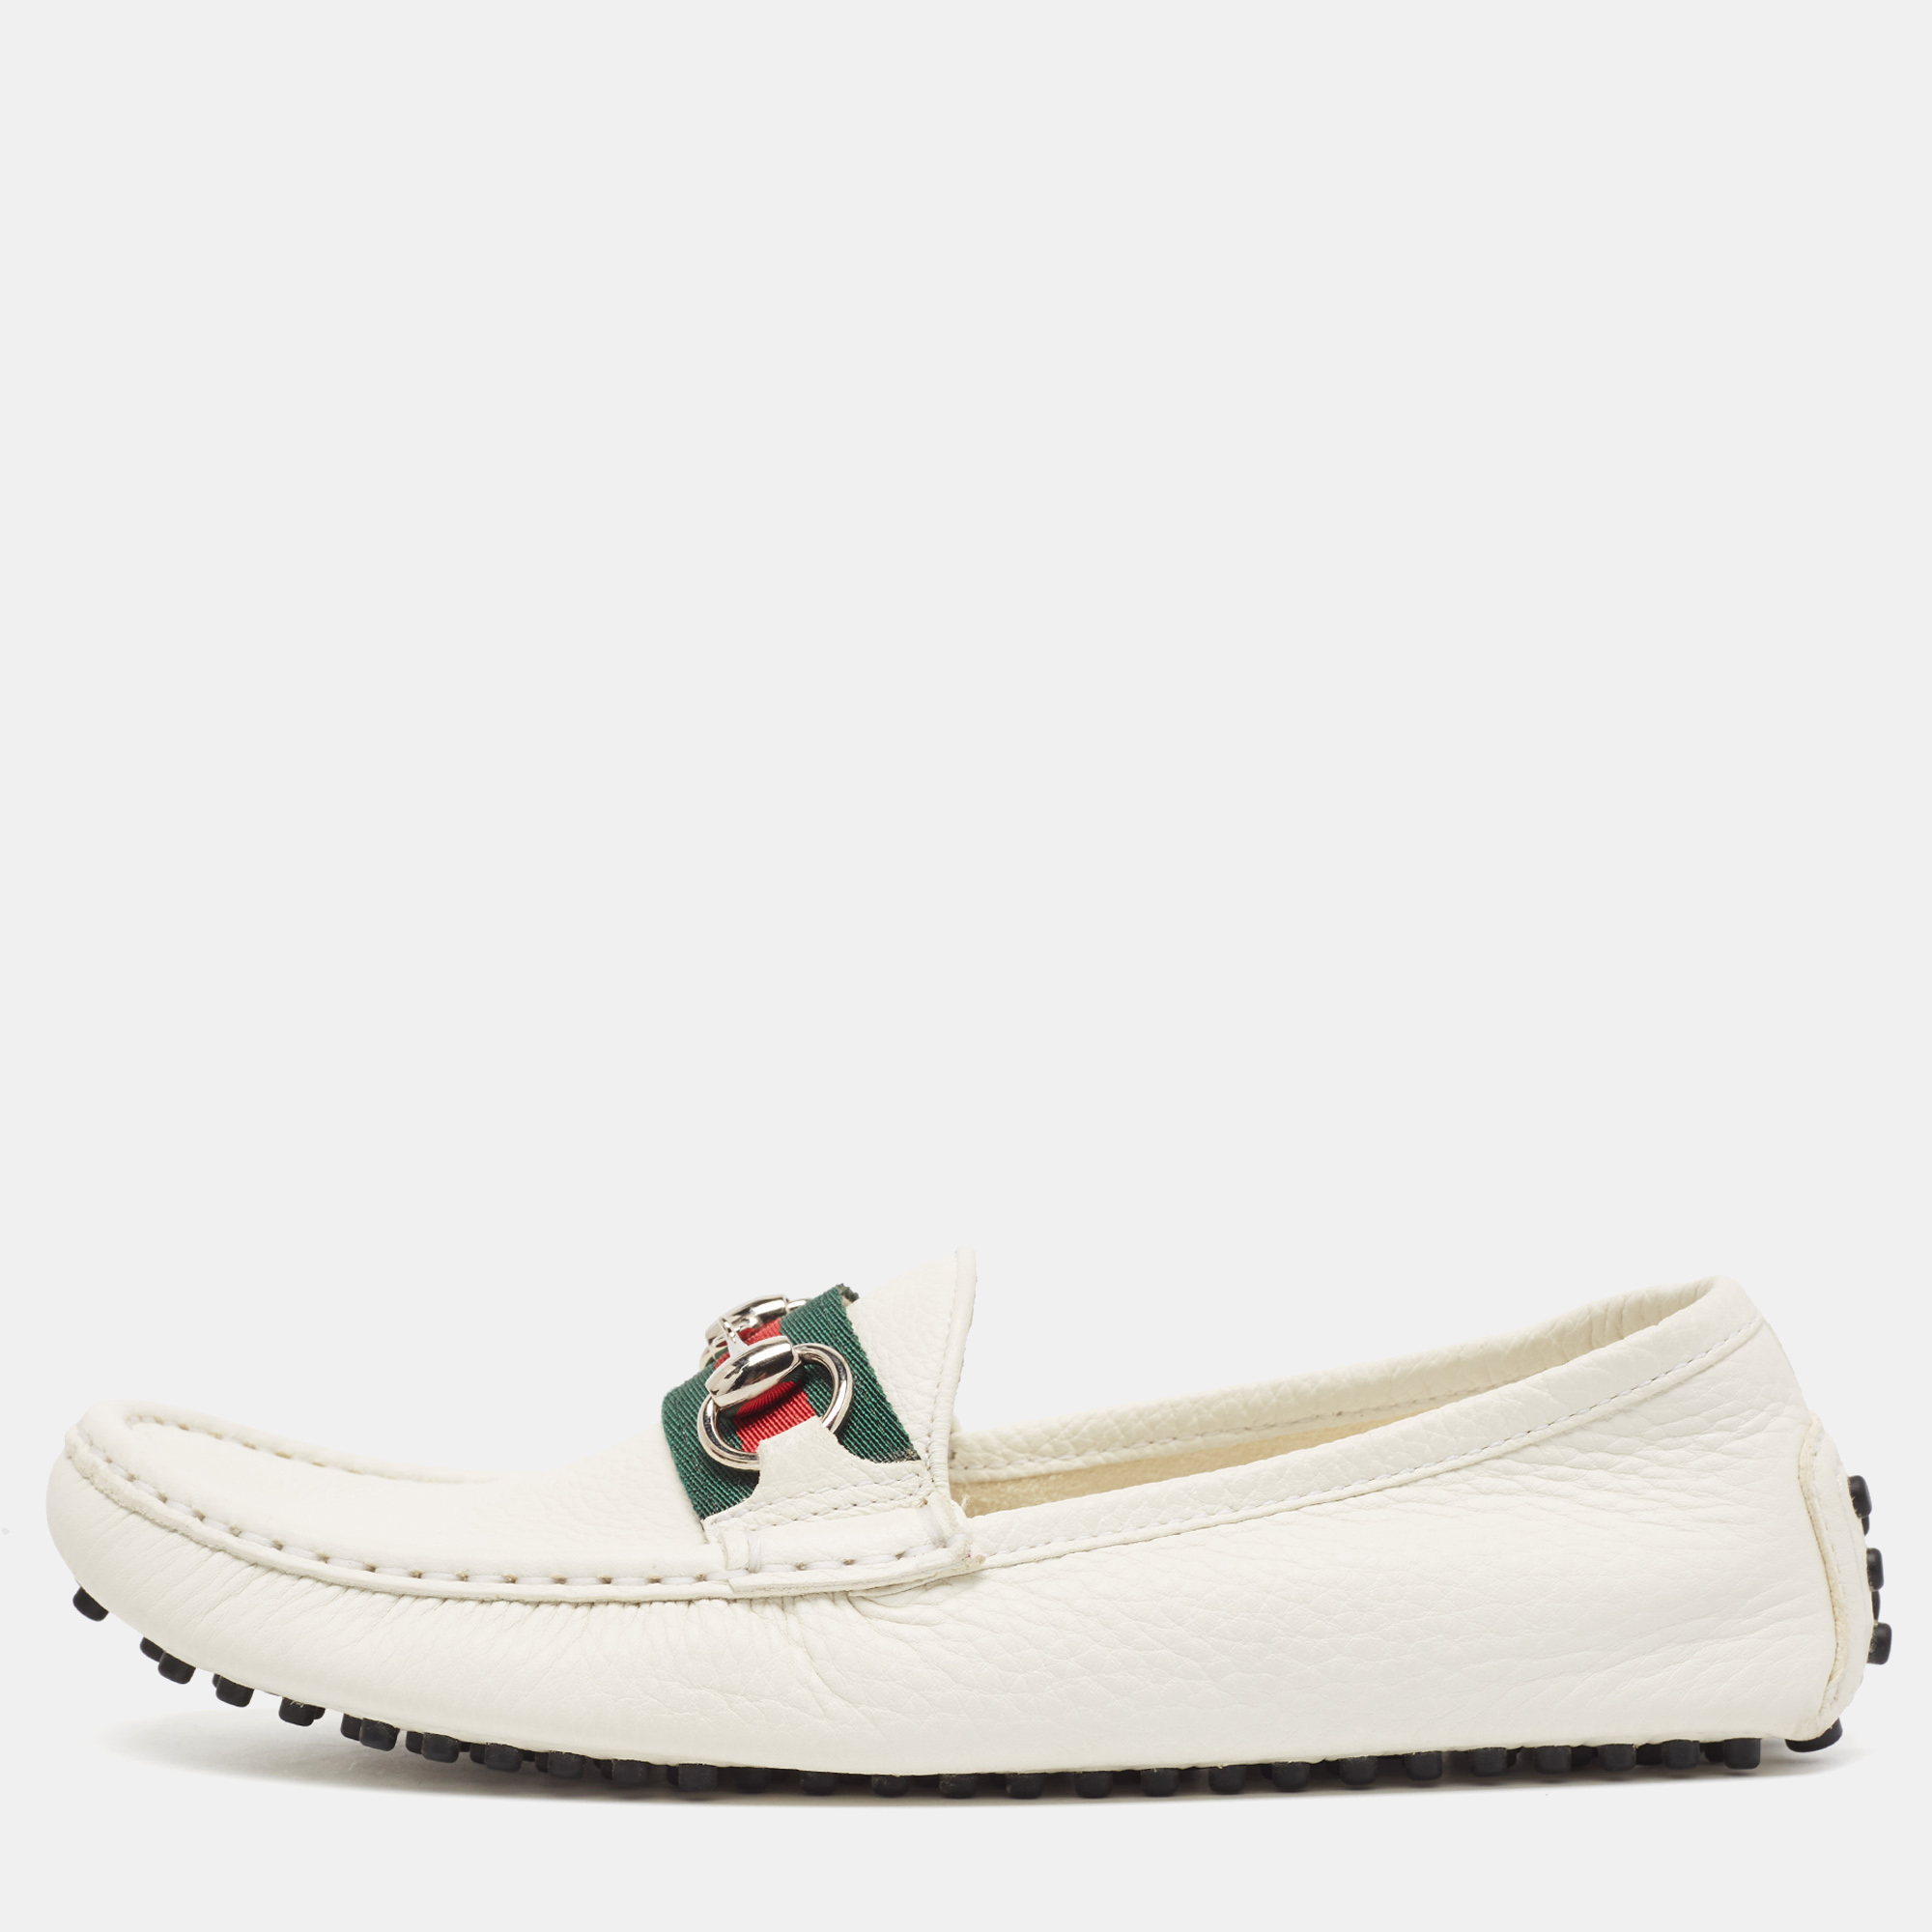 Gucci white leather horsebit web detail loafers size 37